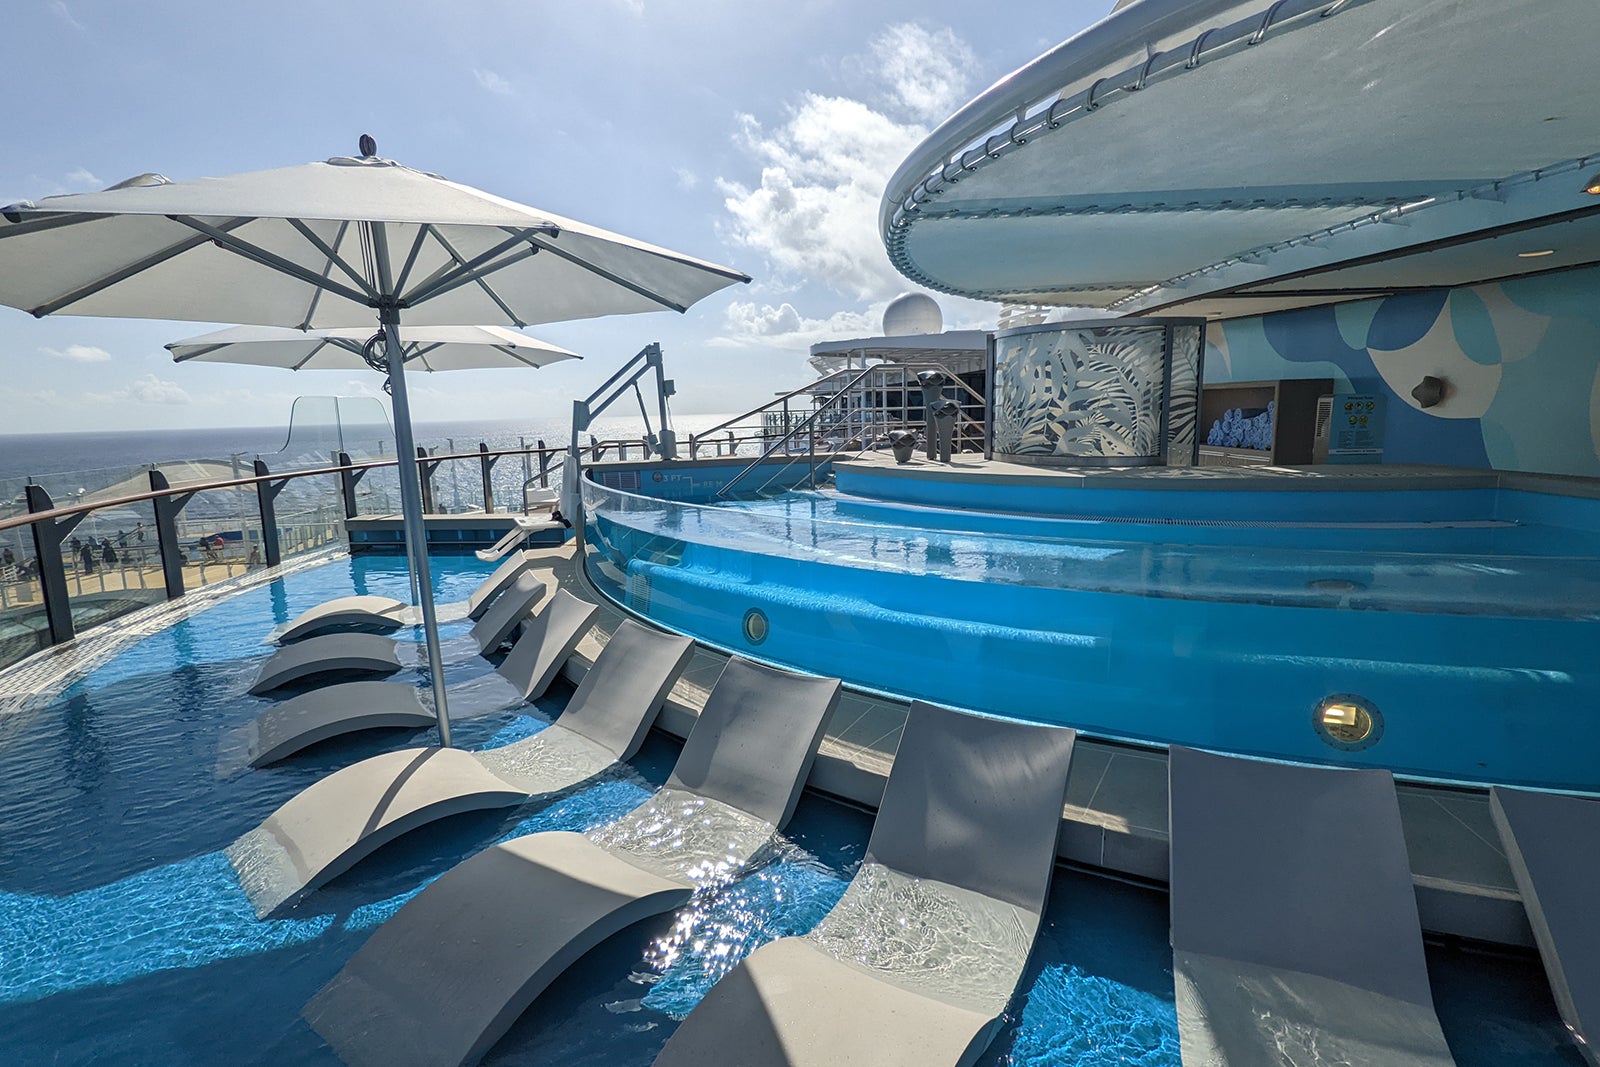 Lounge chairs in wading pool in front of large hot tub on a ship